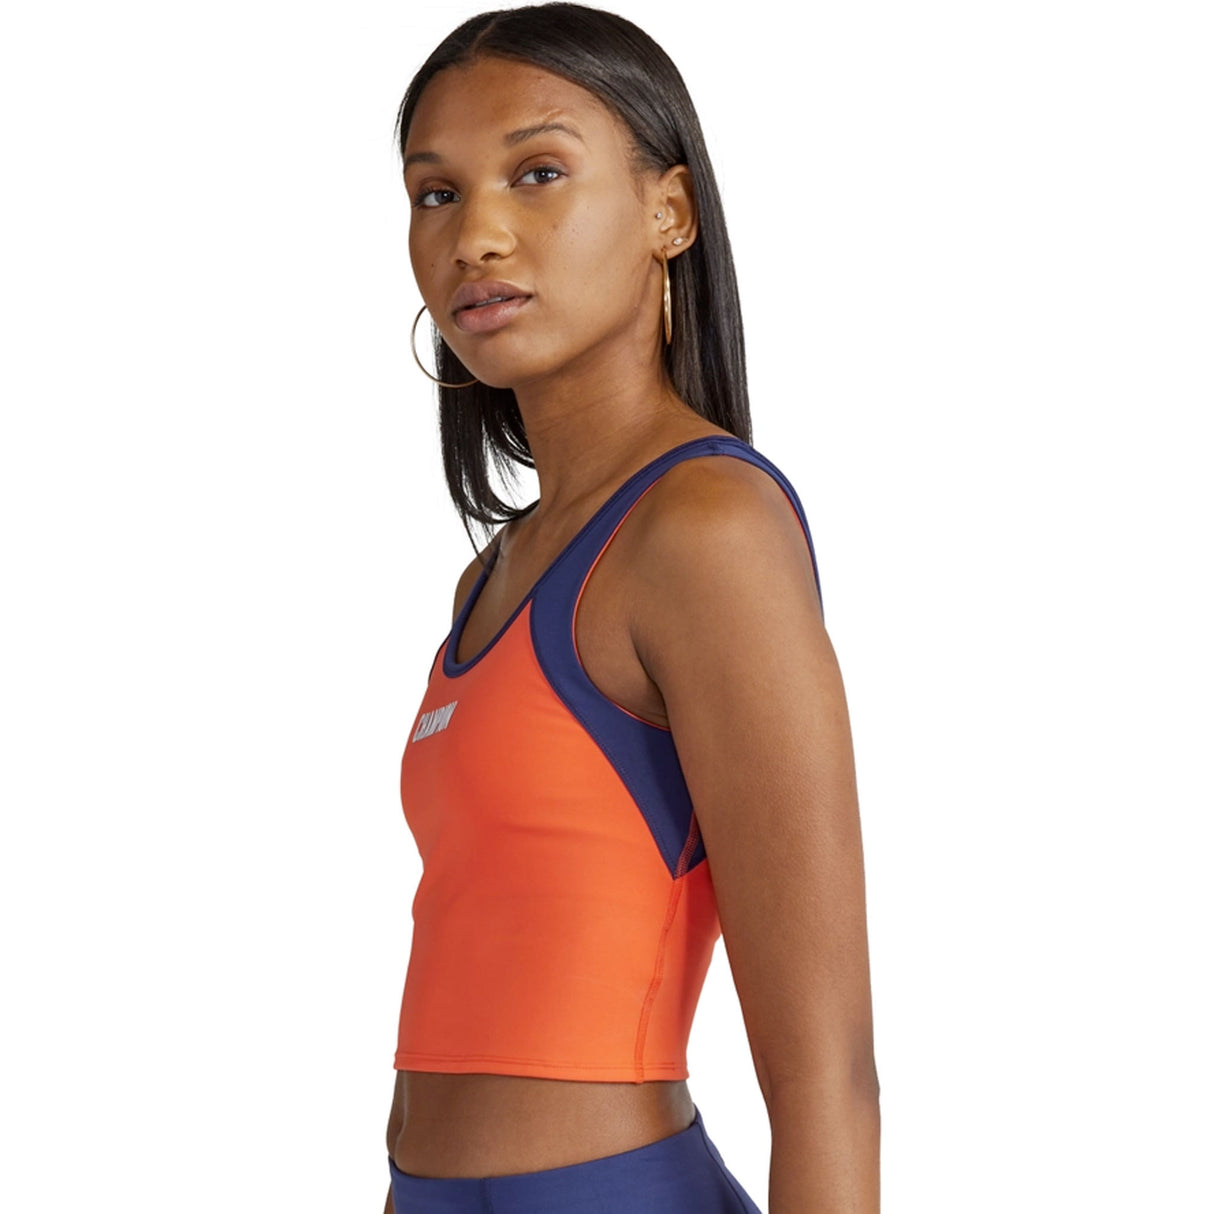 Absolute Eco Crop Top Graphic camisole pour femme - Poppy Orange/Athletic Navy